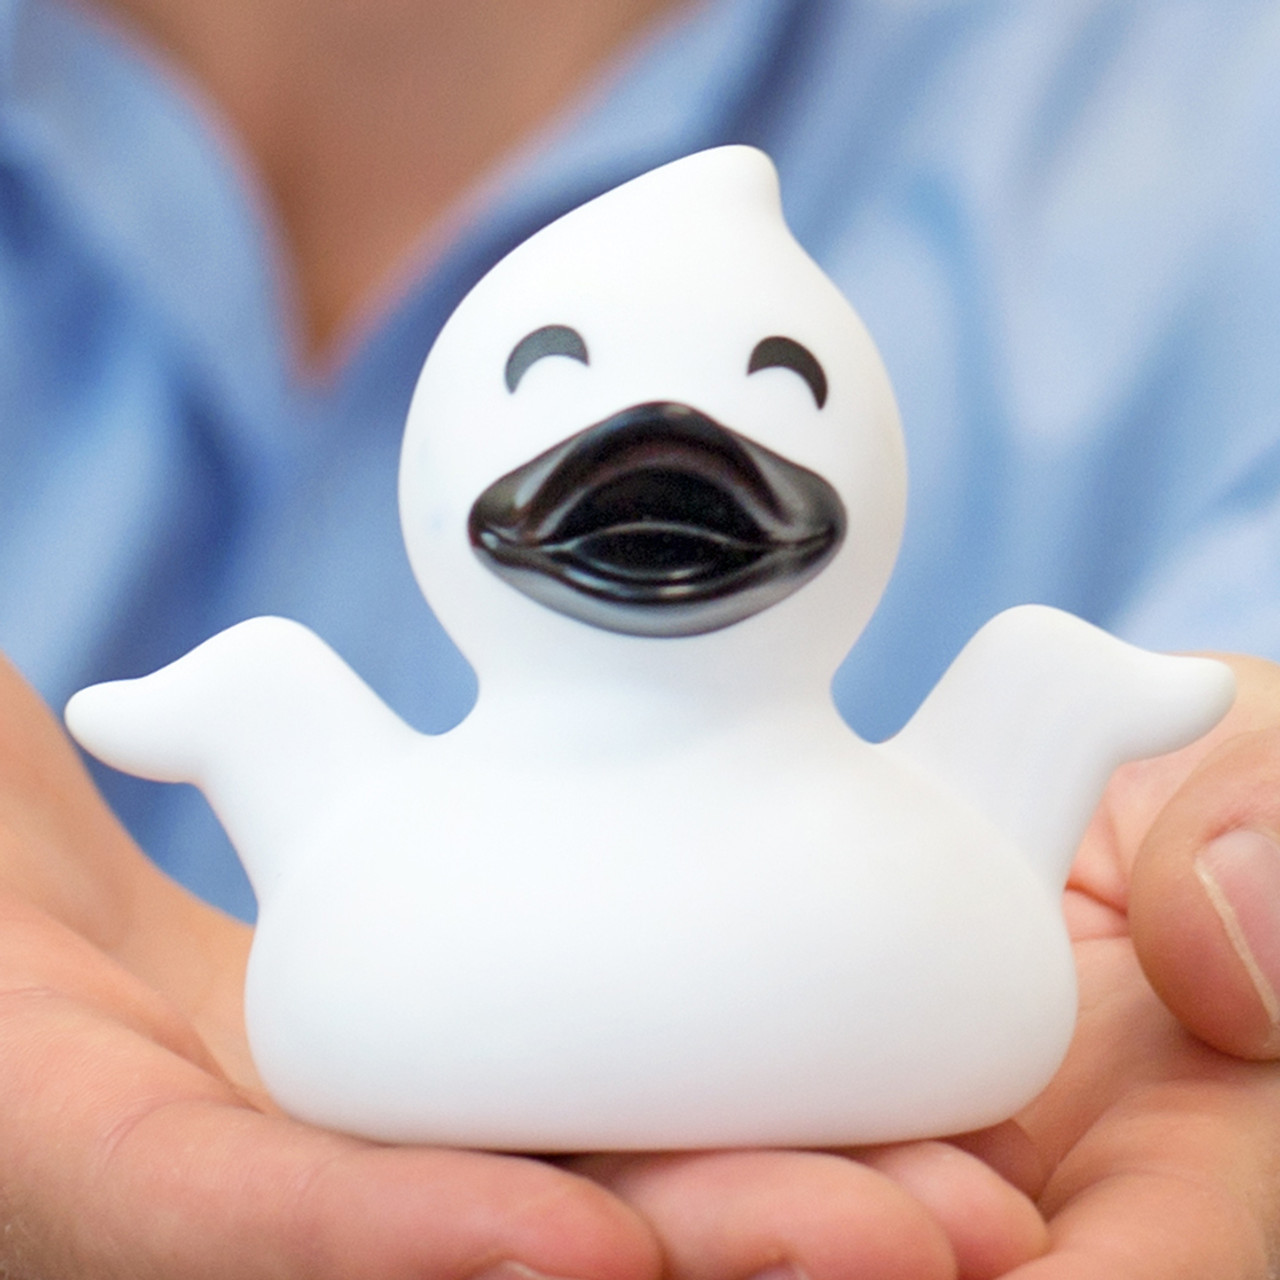 Ghost Rubber Duck Bath Toy by LiLaLu